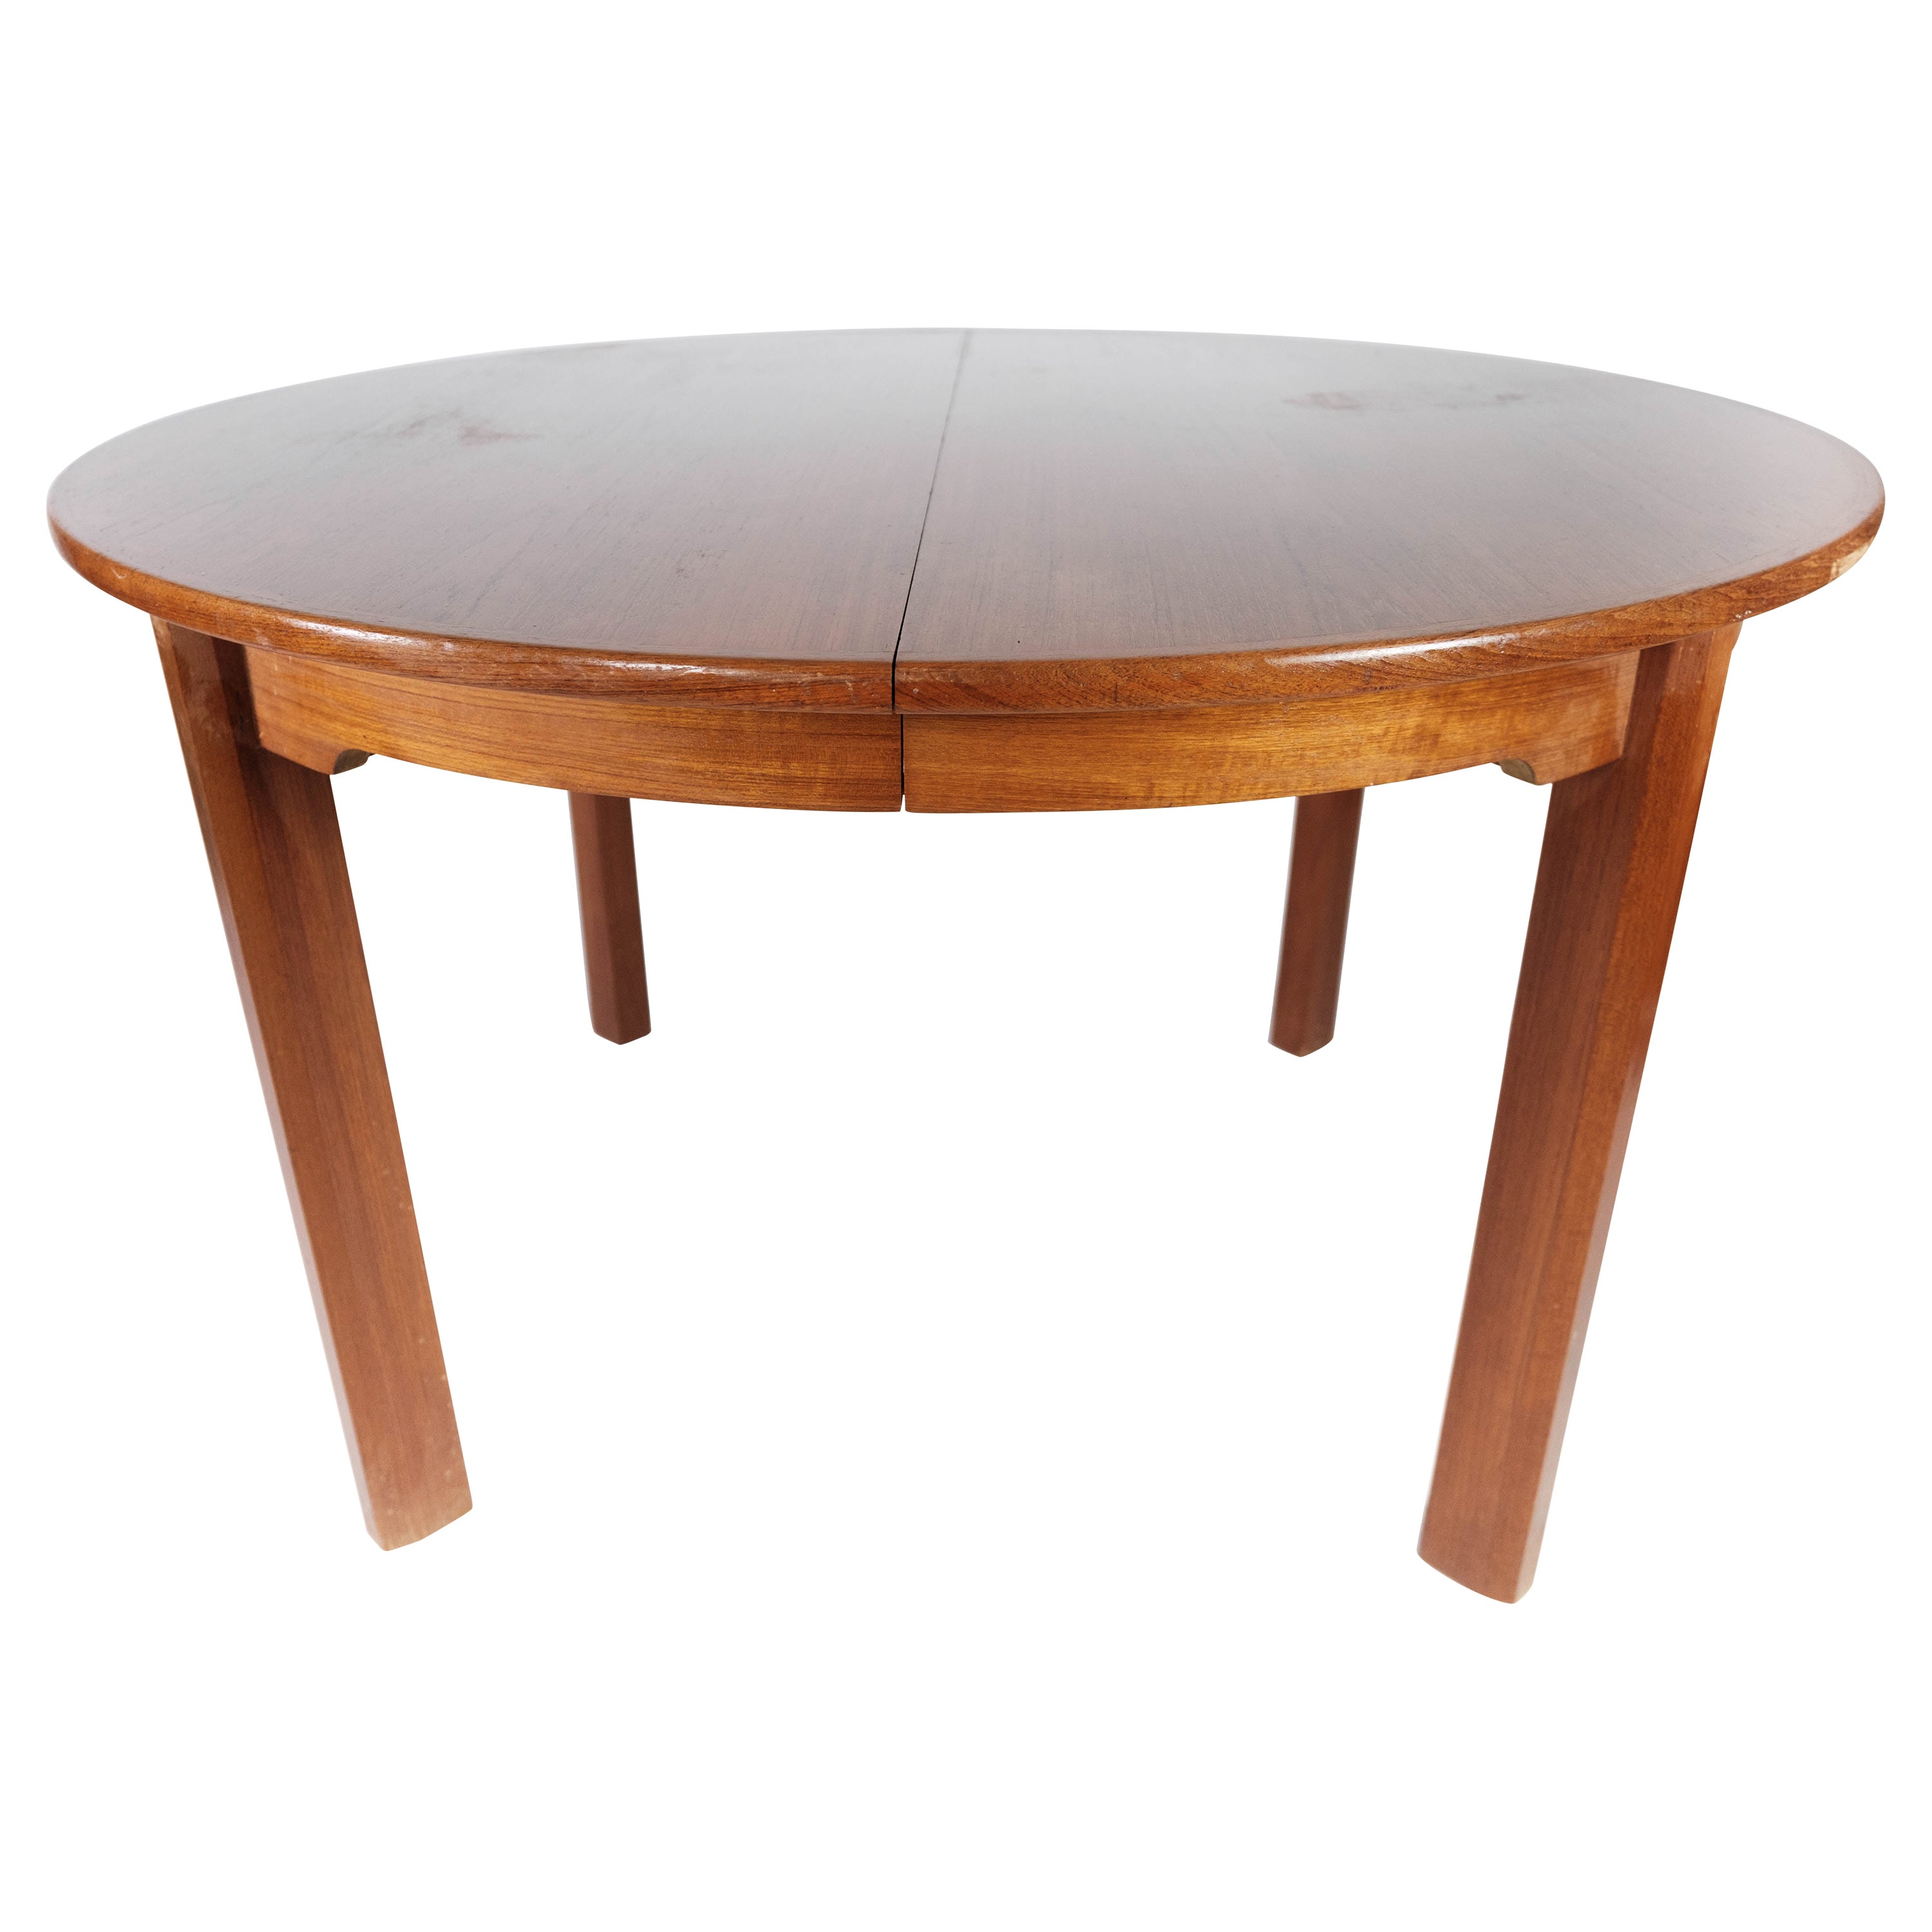 Dining Table with Extension in Teak of Danish Design from the 1960s